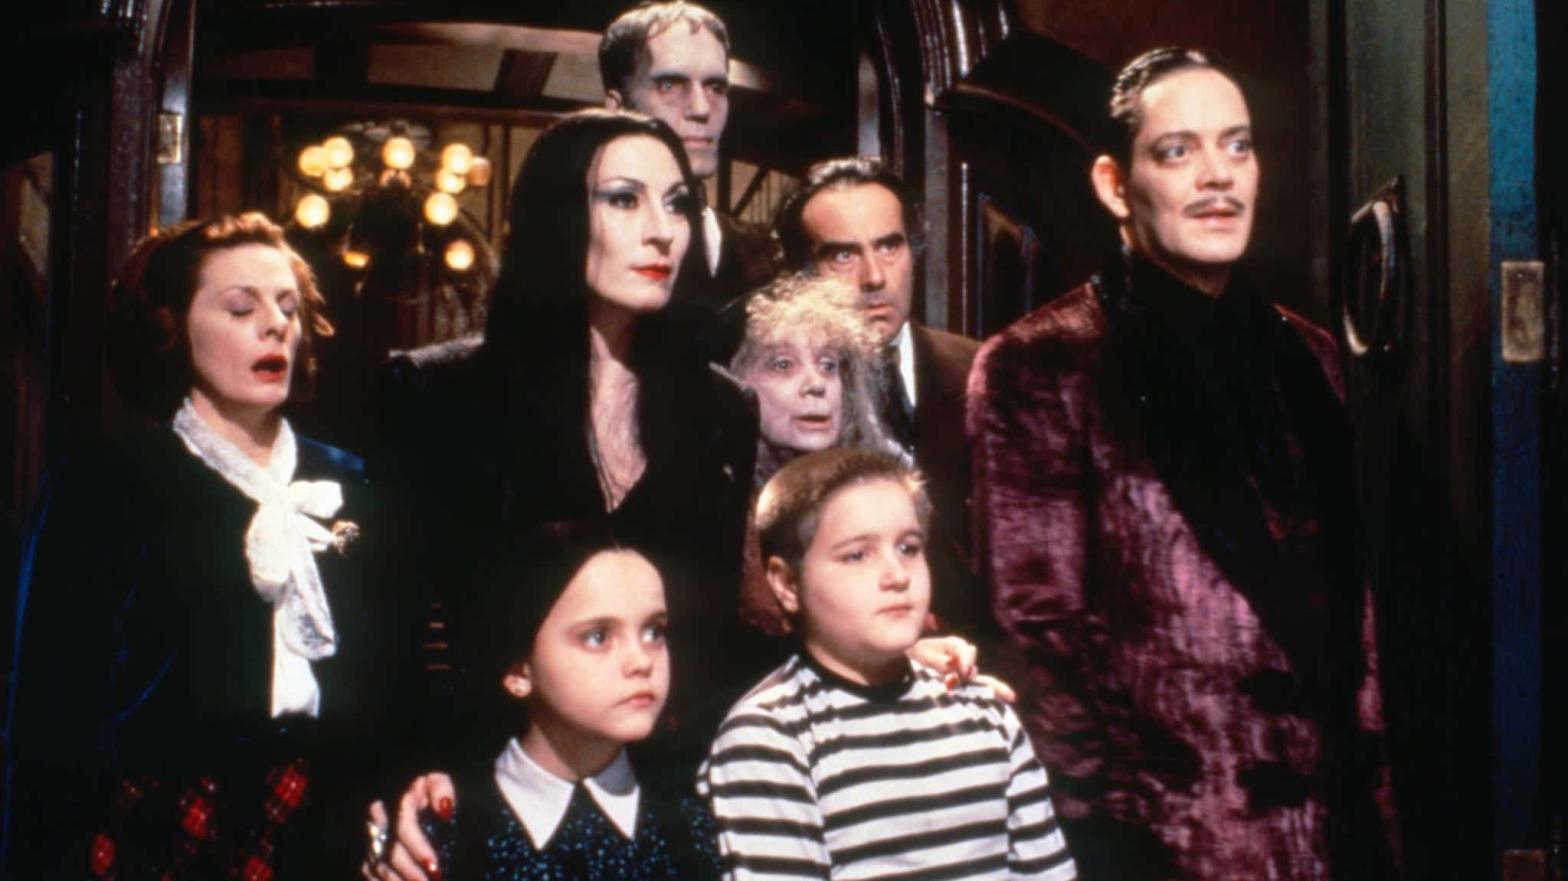 The Addams Family will return to live action again, this time back on TV.  (Photo: MGM)